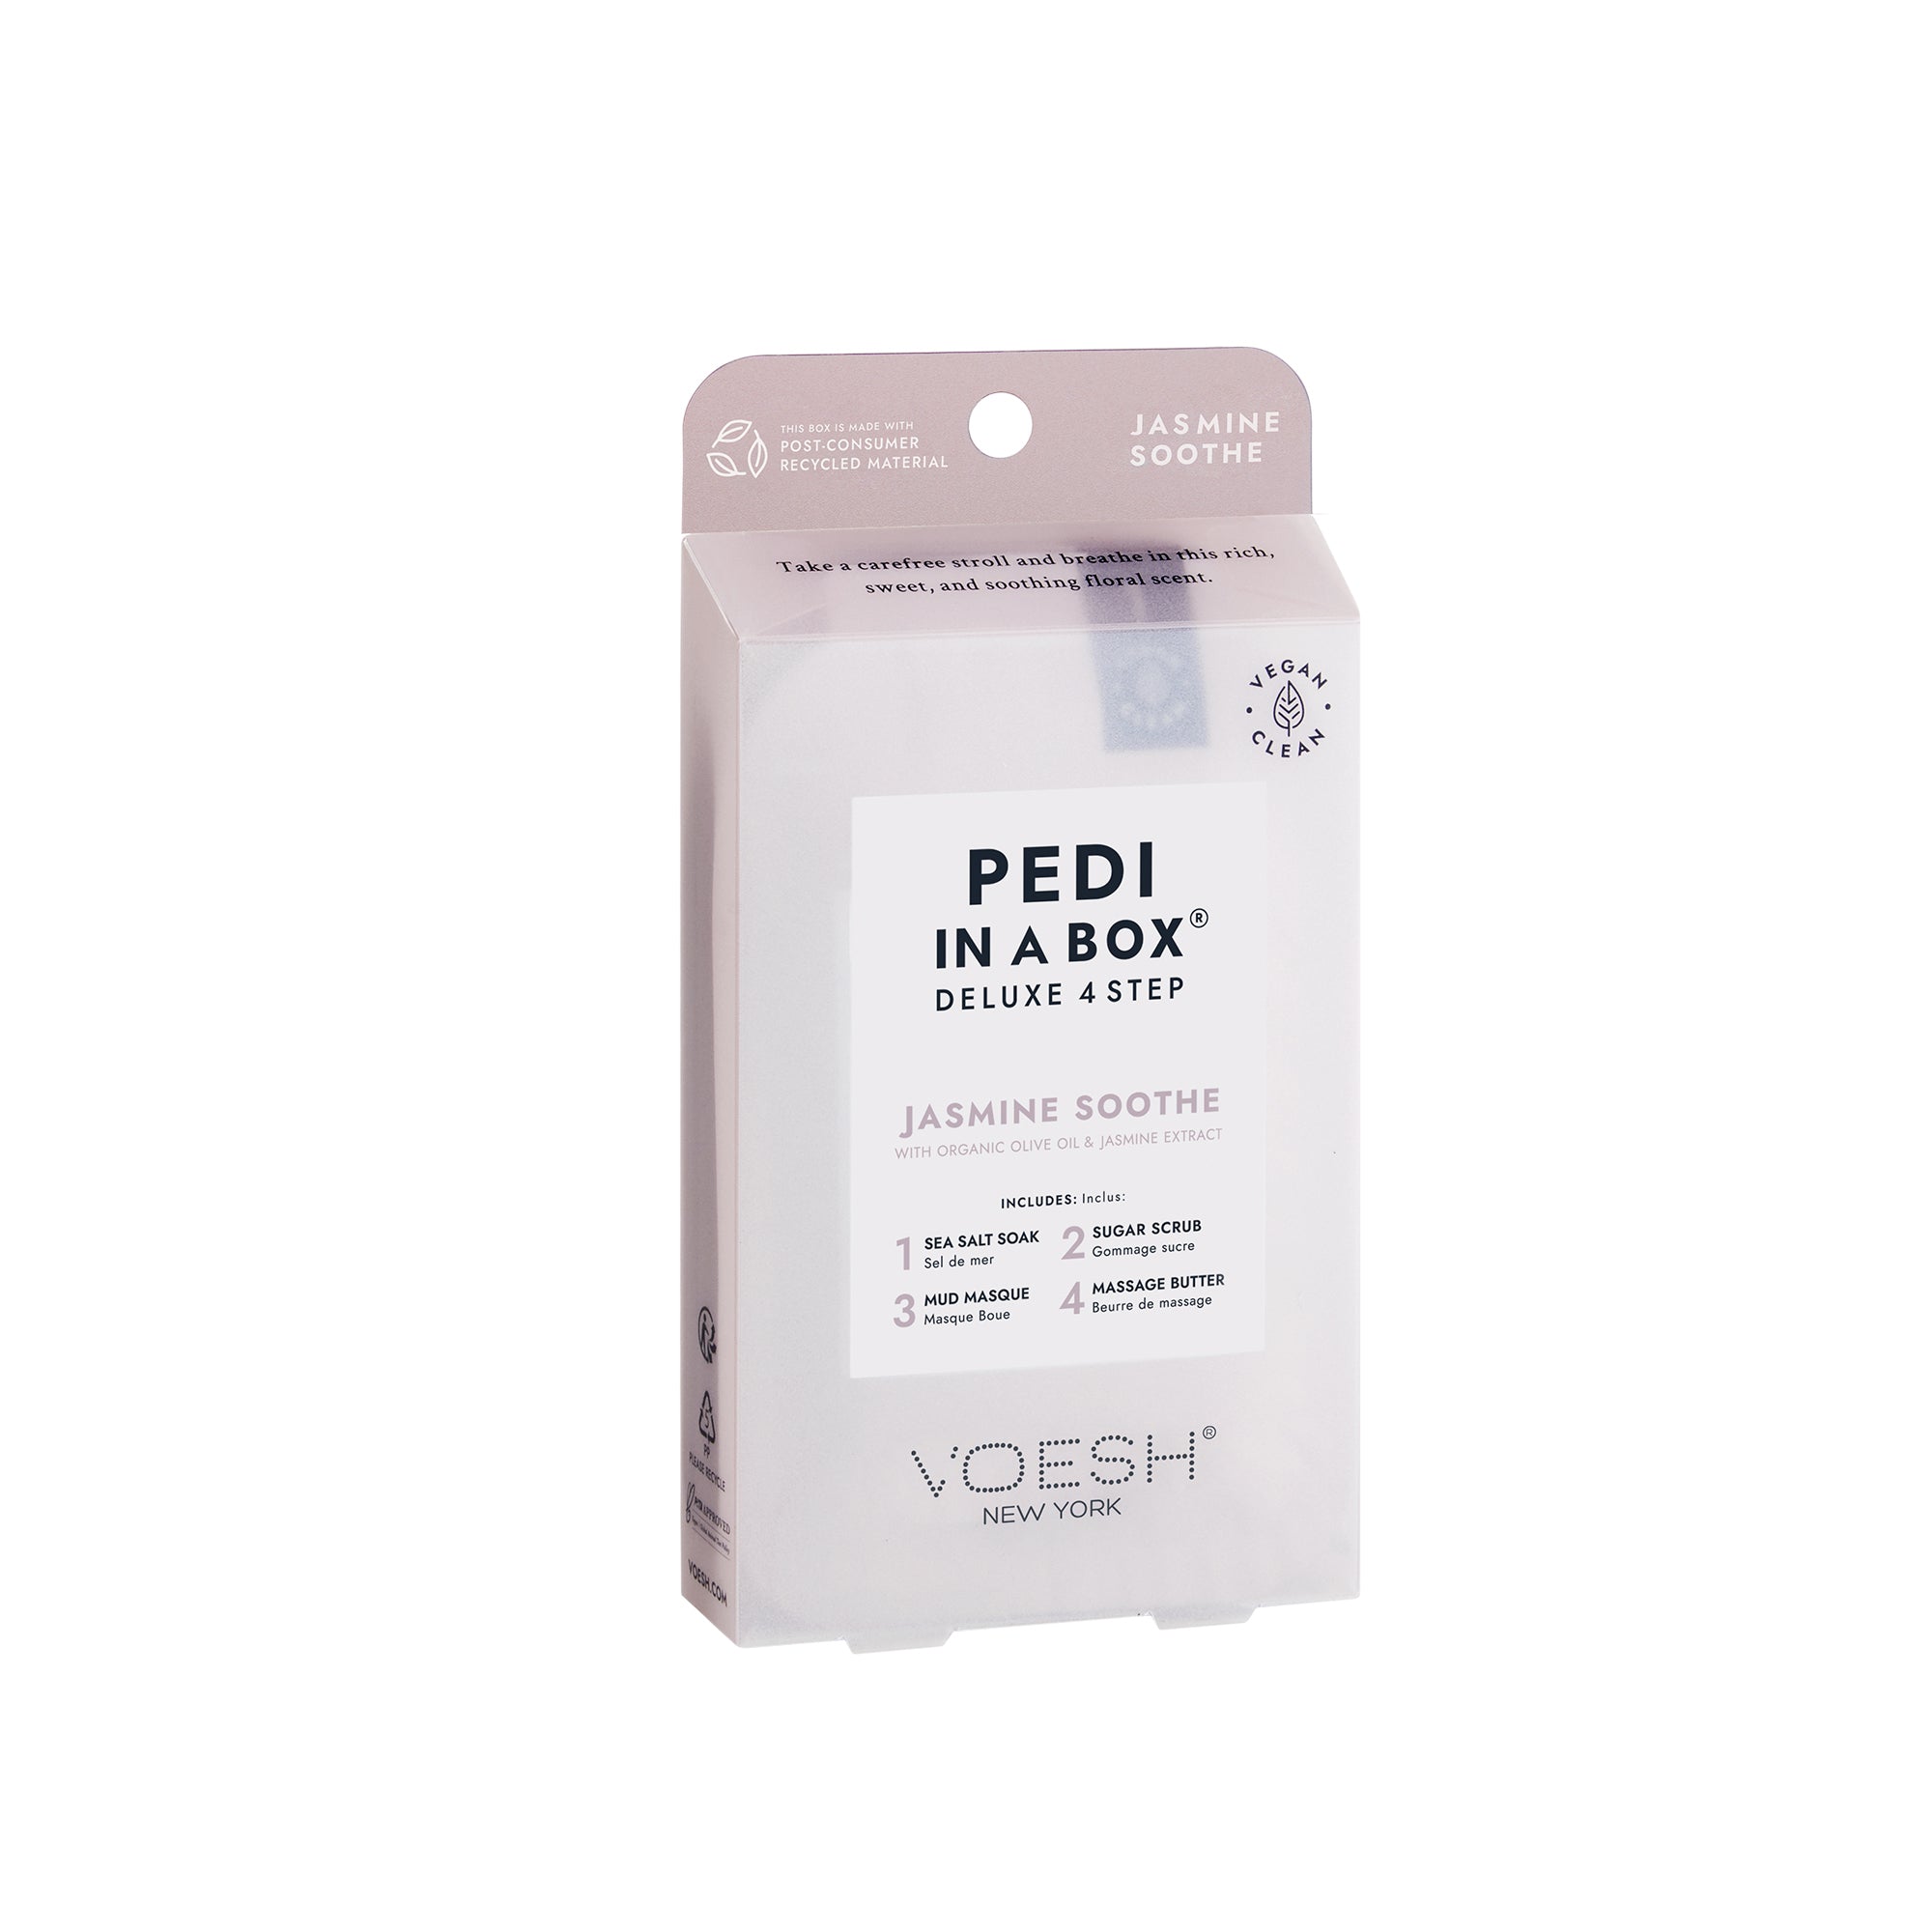 Voesh Deluxe 4 Step Pedi-in-a-Box Jasmine Soothe